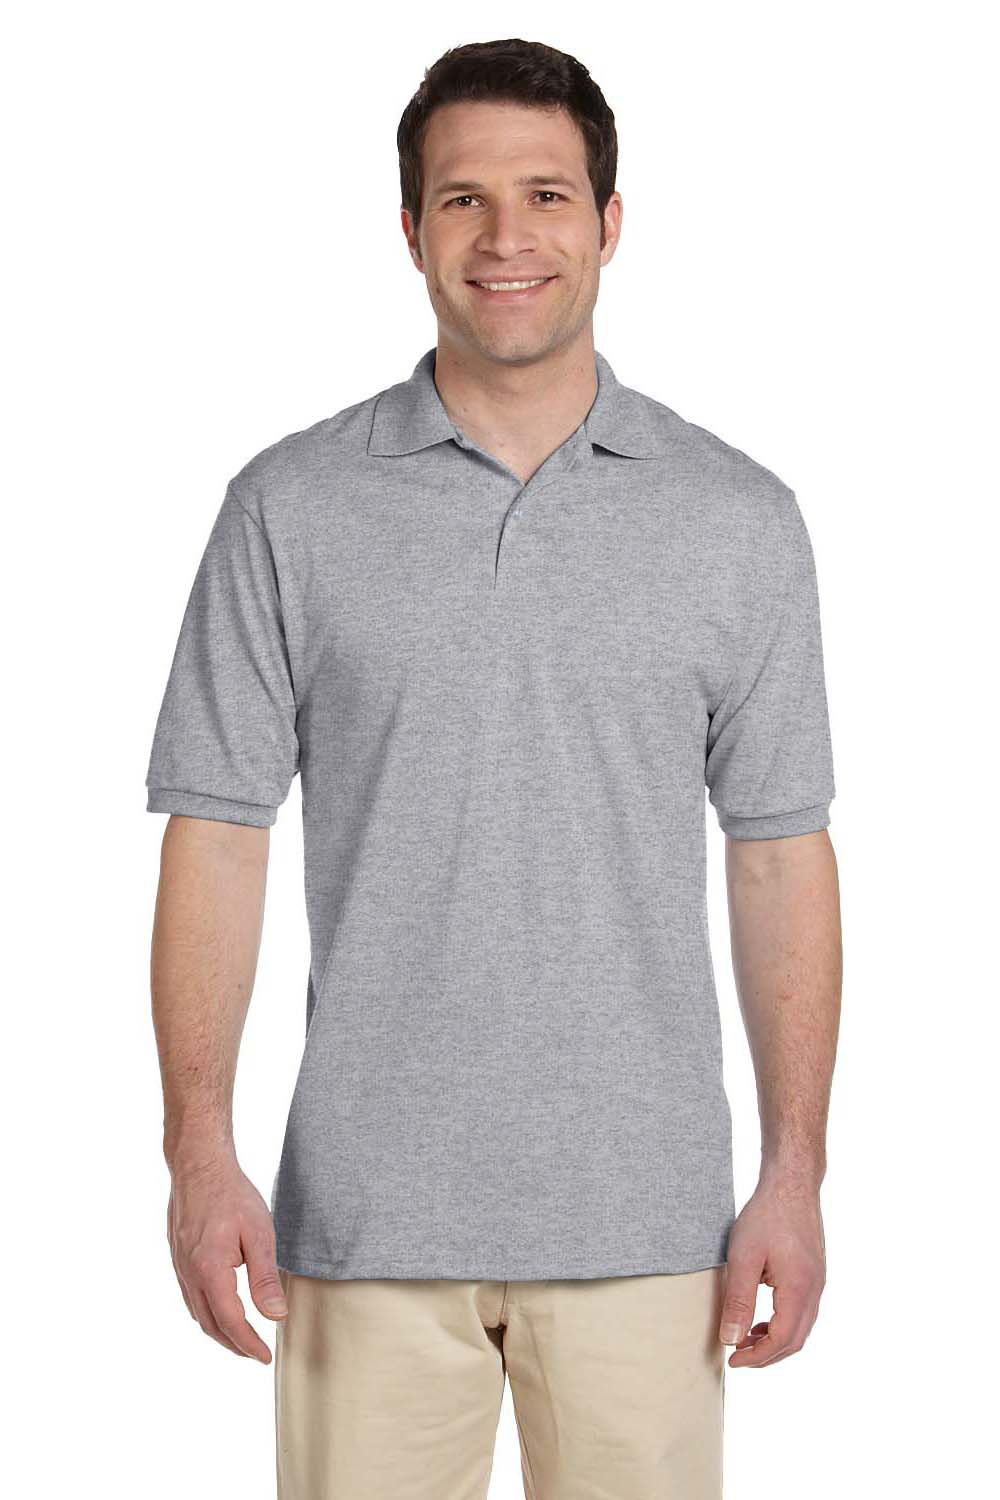 Jerzees 437 Mens SpotShield Stain Resistant Short Sleeve Polo Shirt Oxford Grey Front